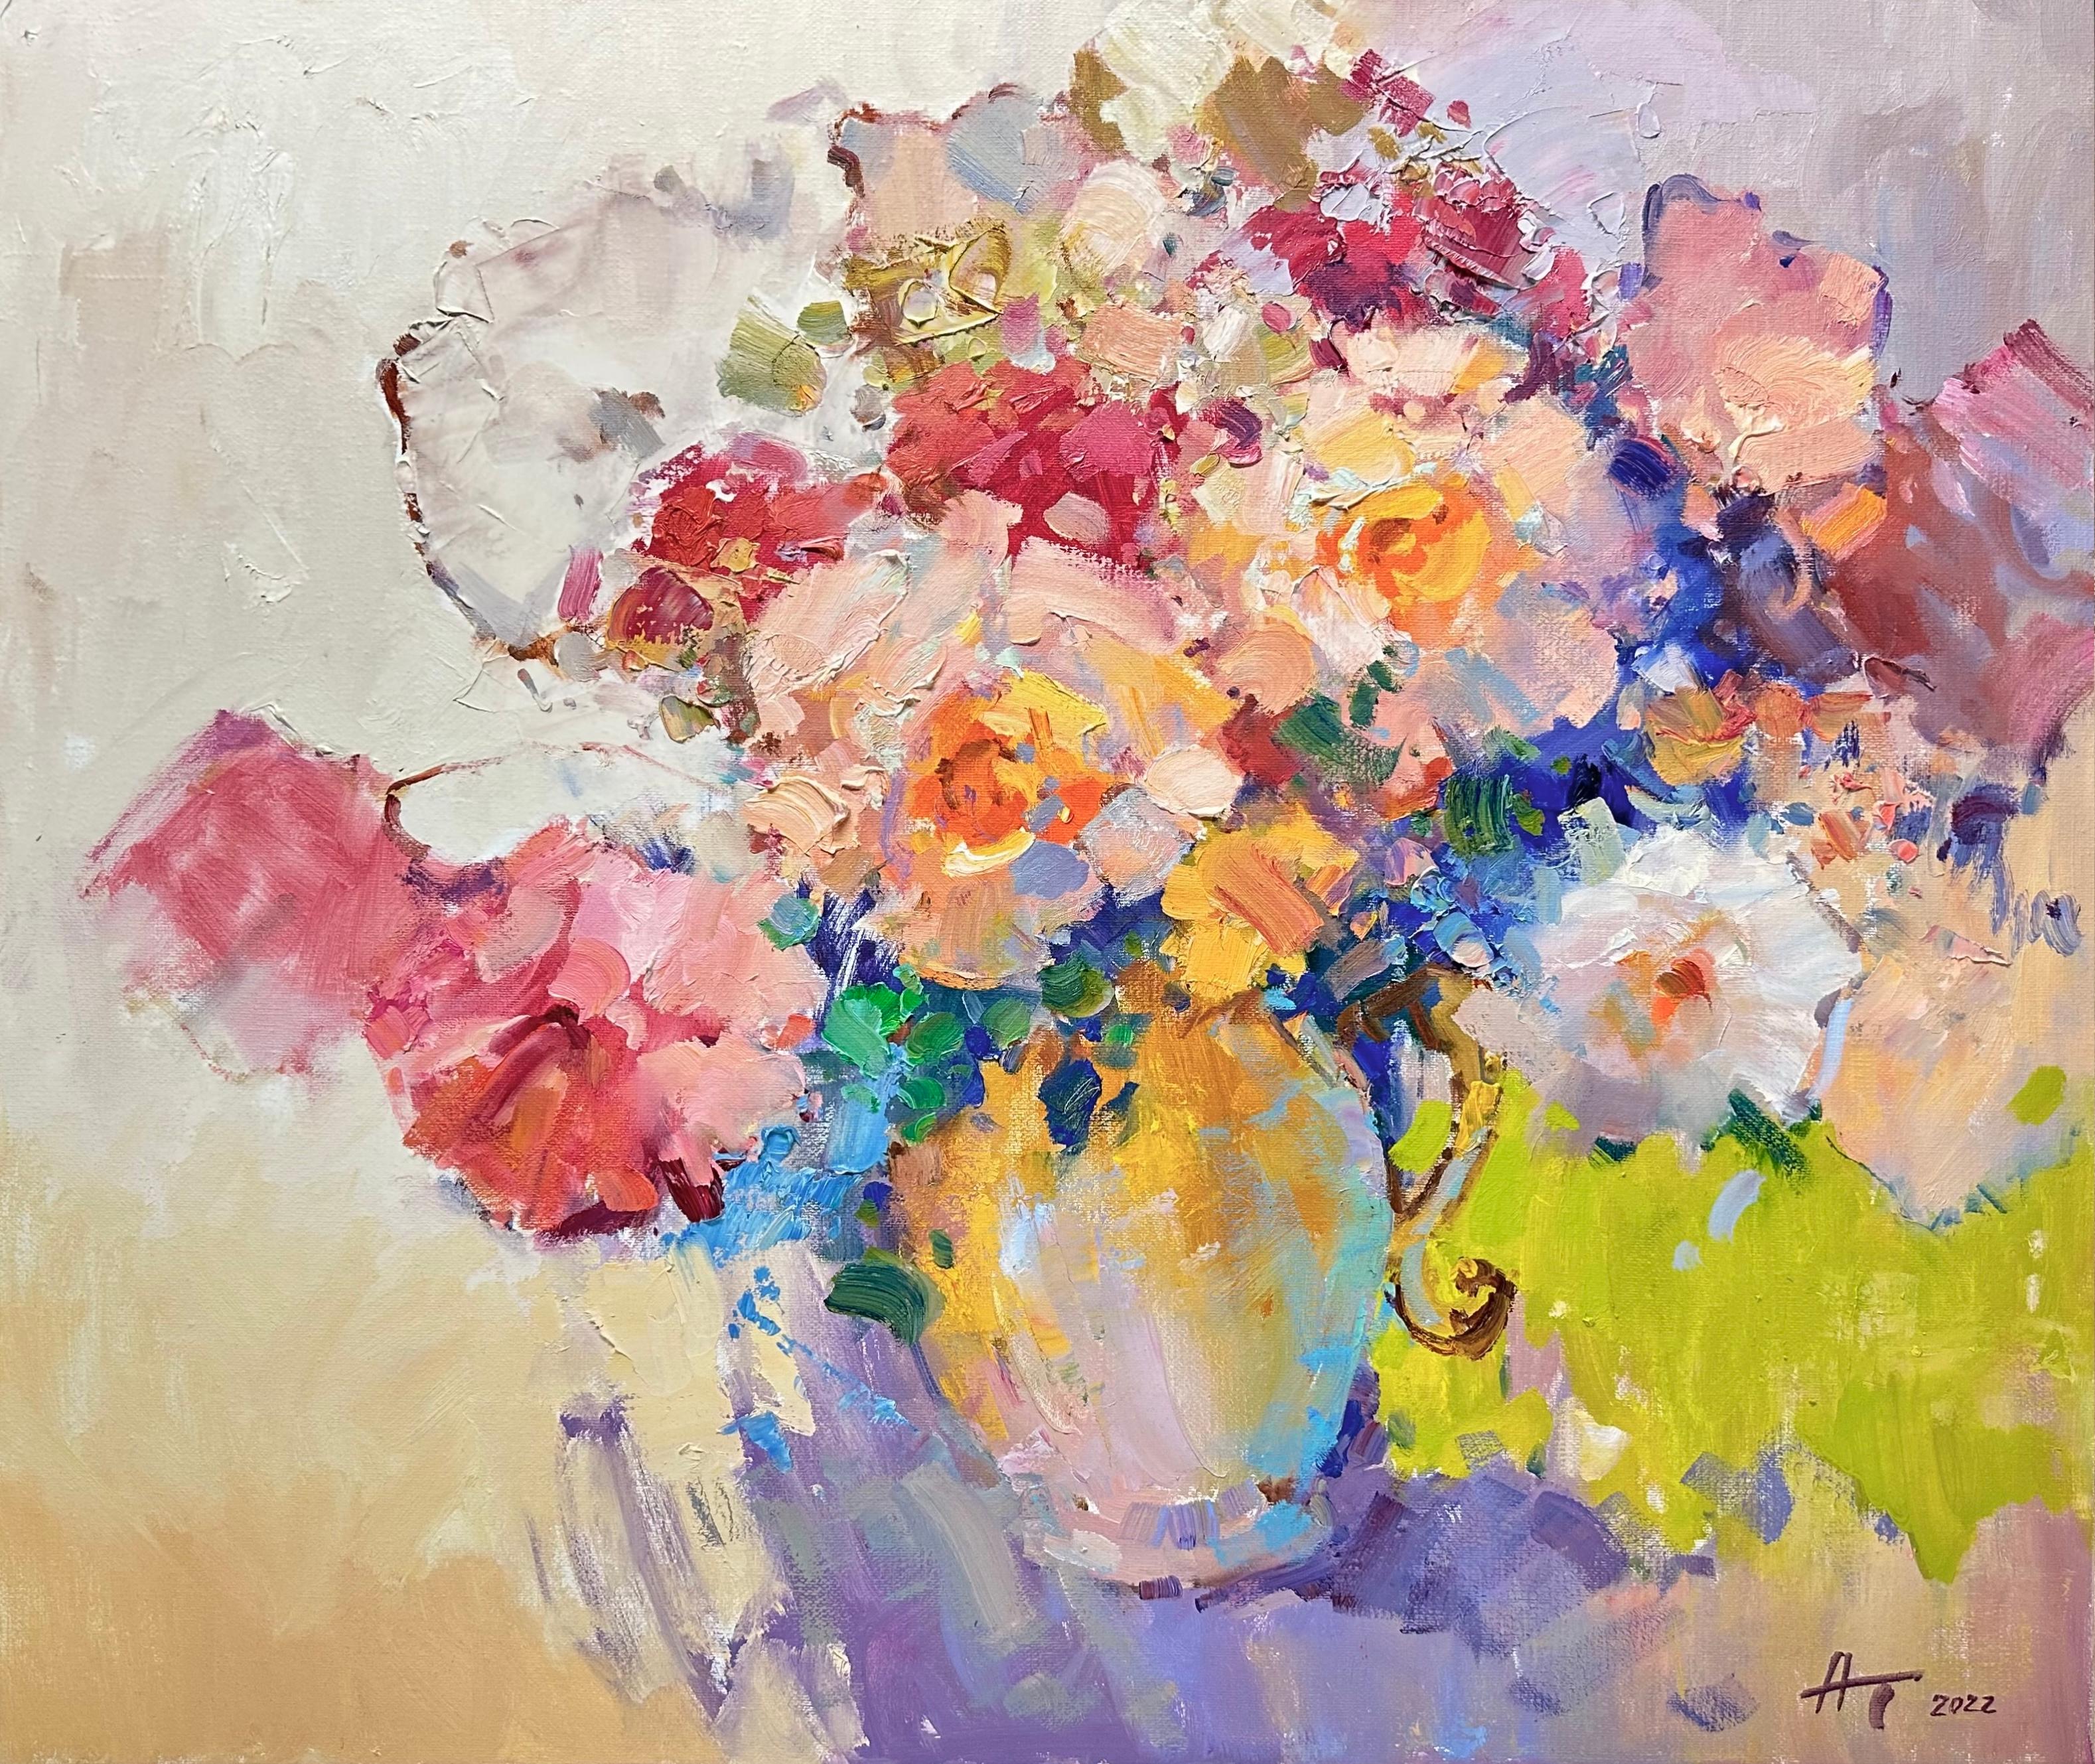 Bouquet, Original Oil Painting with Flowers by Andrei Belaichuk